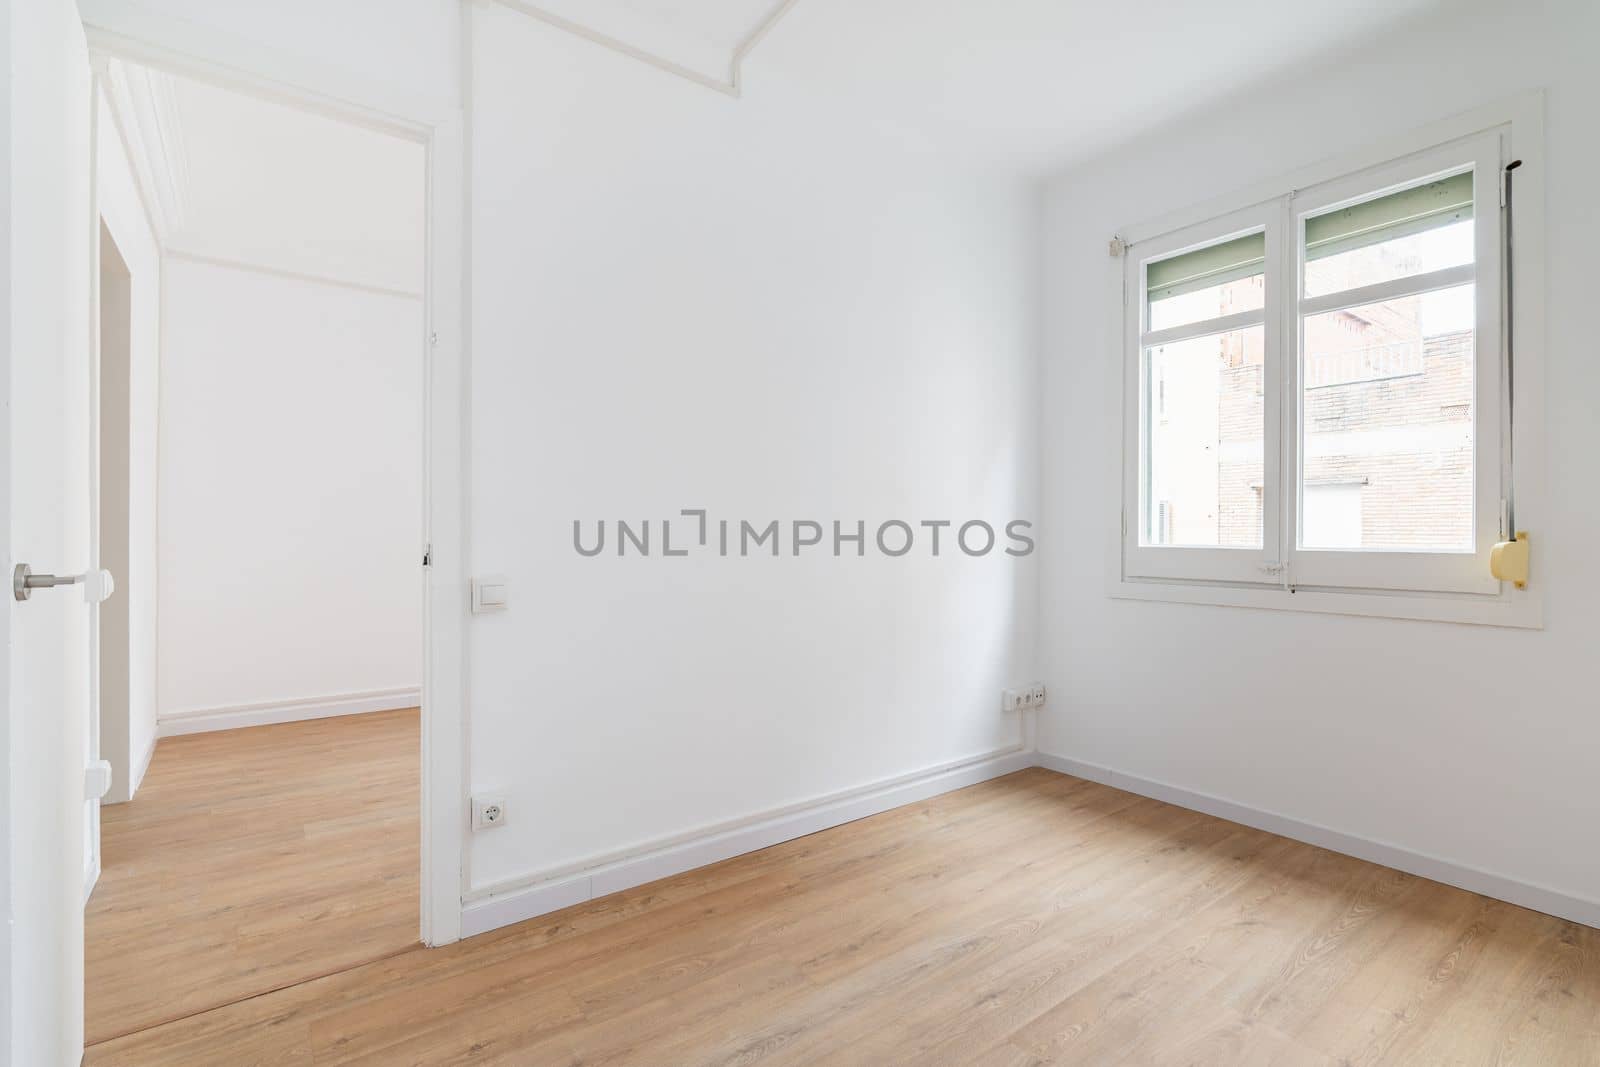 Bright white spacious unfurnished apartment with an window and wooden textured laminate. Concept of modern building or moving to new apartment. Interior design renovation.